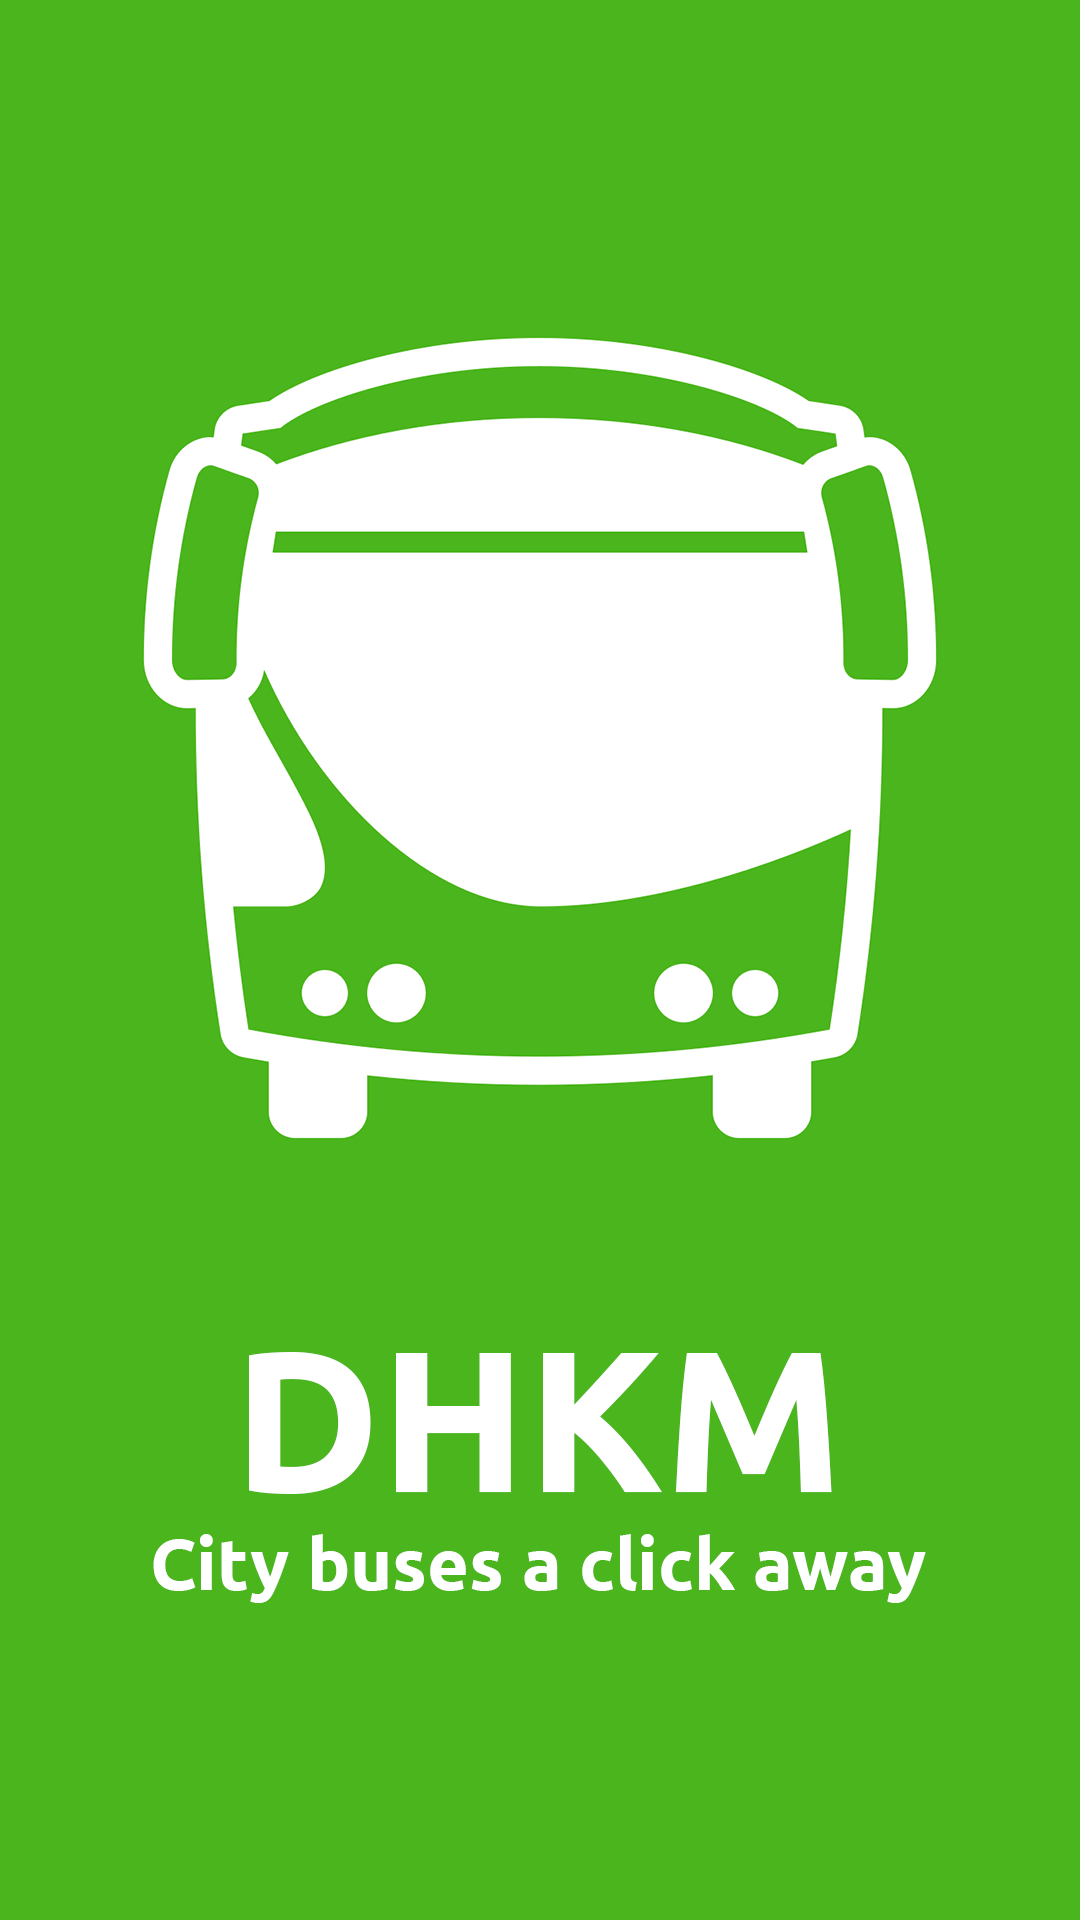 DHKM